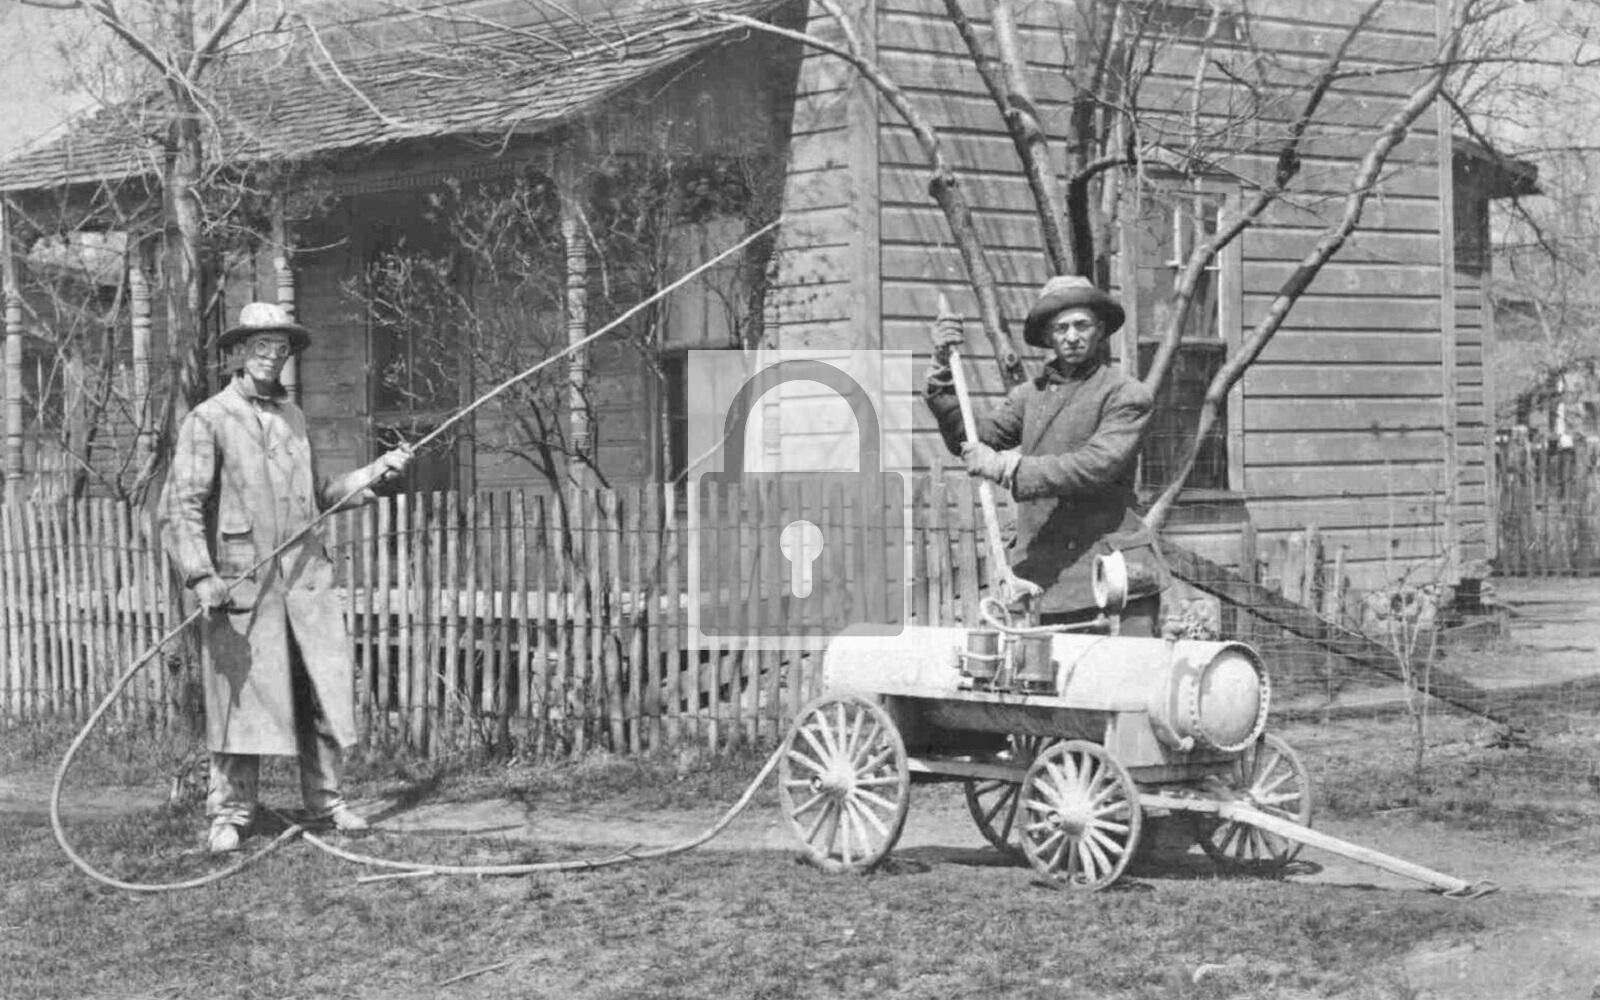 Two Men With Air Pressure Sprayer Milford Indiana IN Reprint Postcard